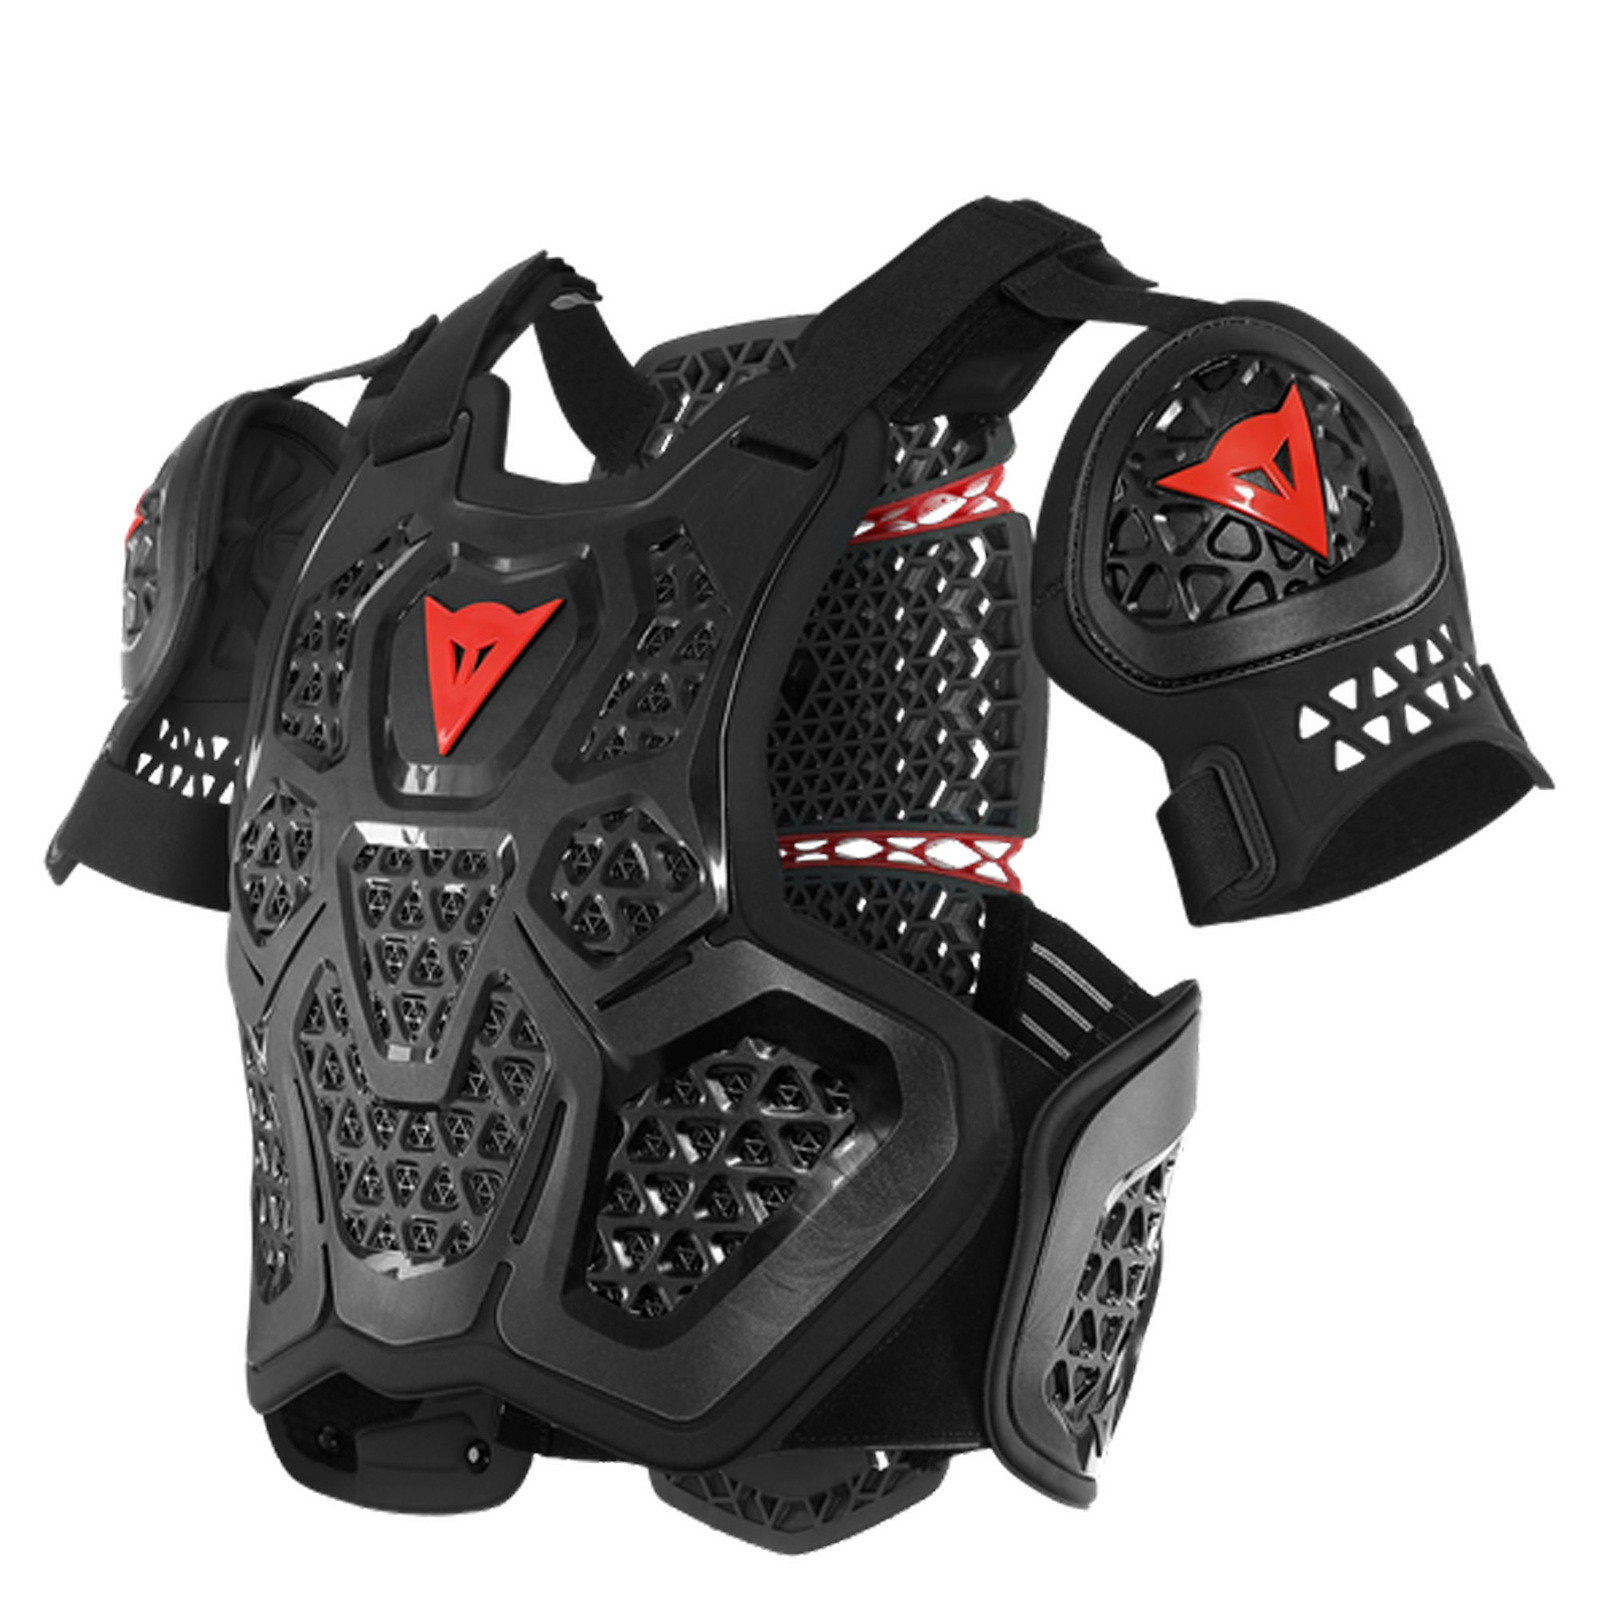 DAINESE ARMOUR MX 1 ROOST GUARD EBONY/BLACK/XS/M